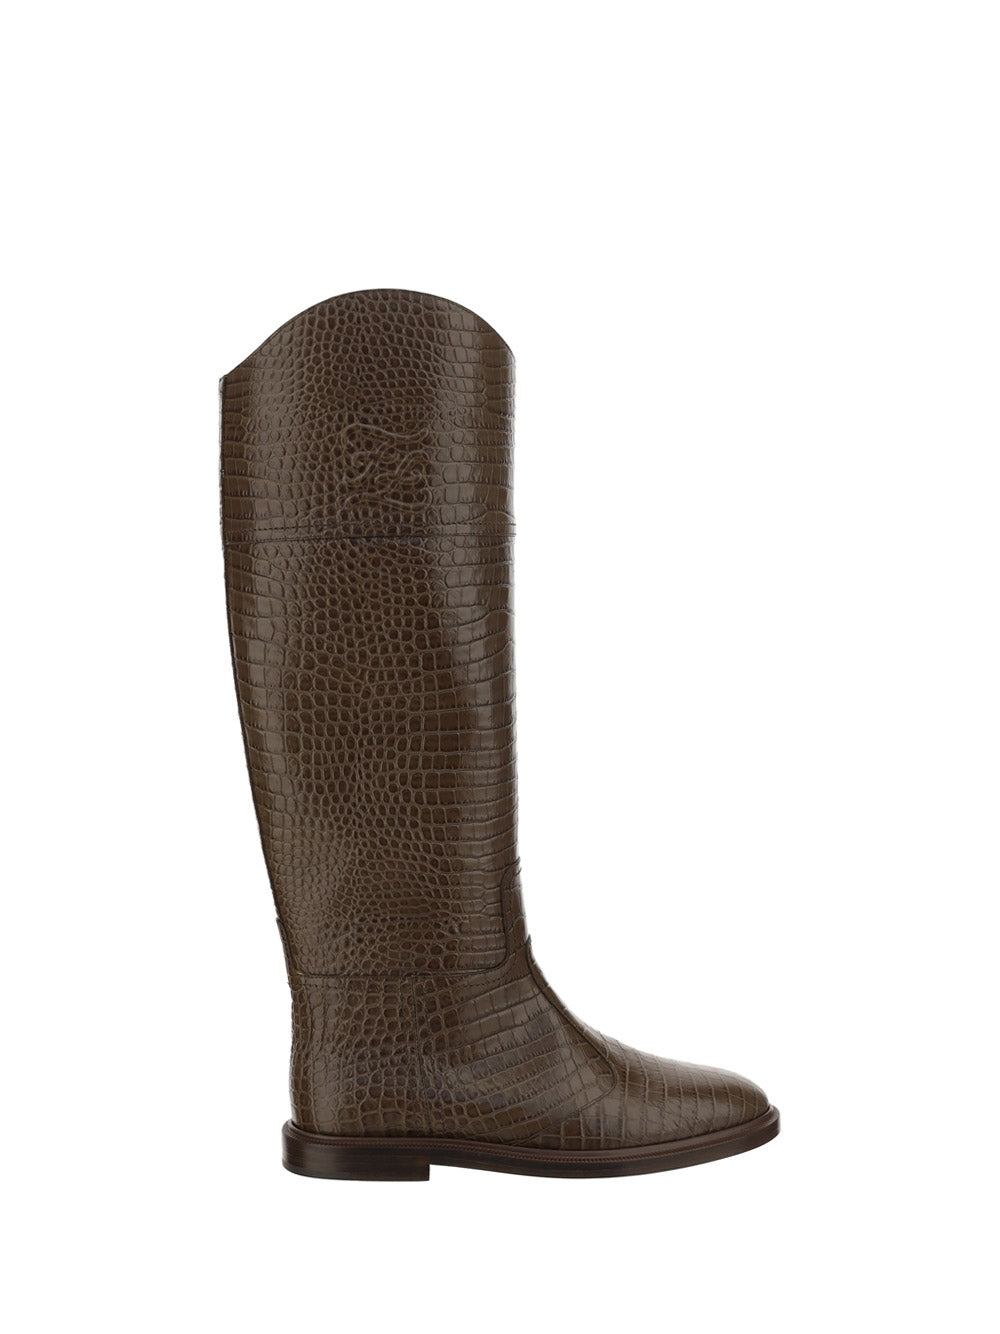 FF Karligraphy Motif Boots In Crocodile-Embossed Leather - Brown